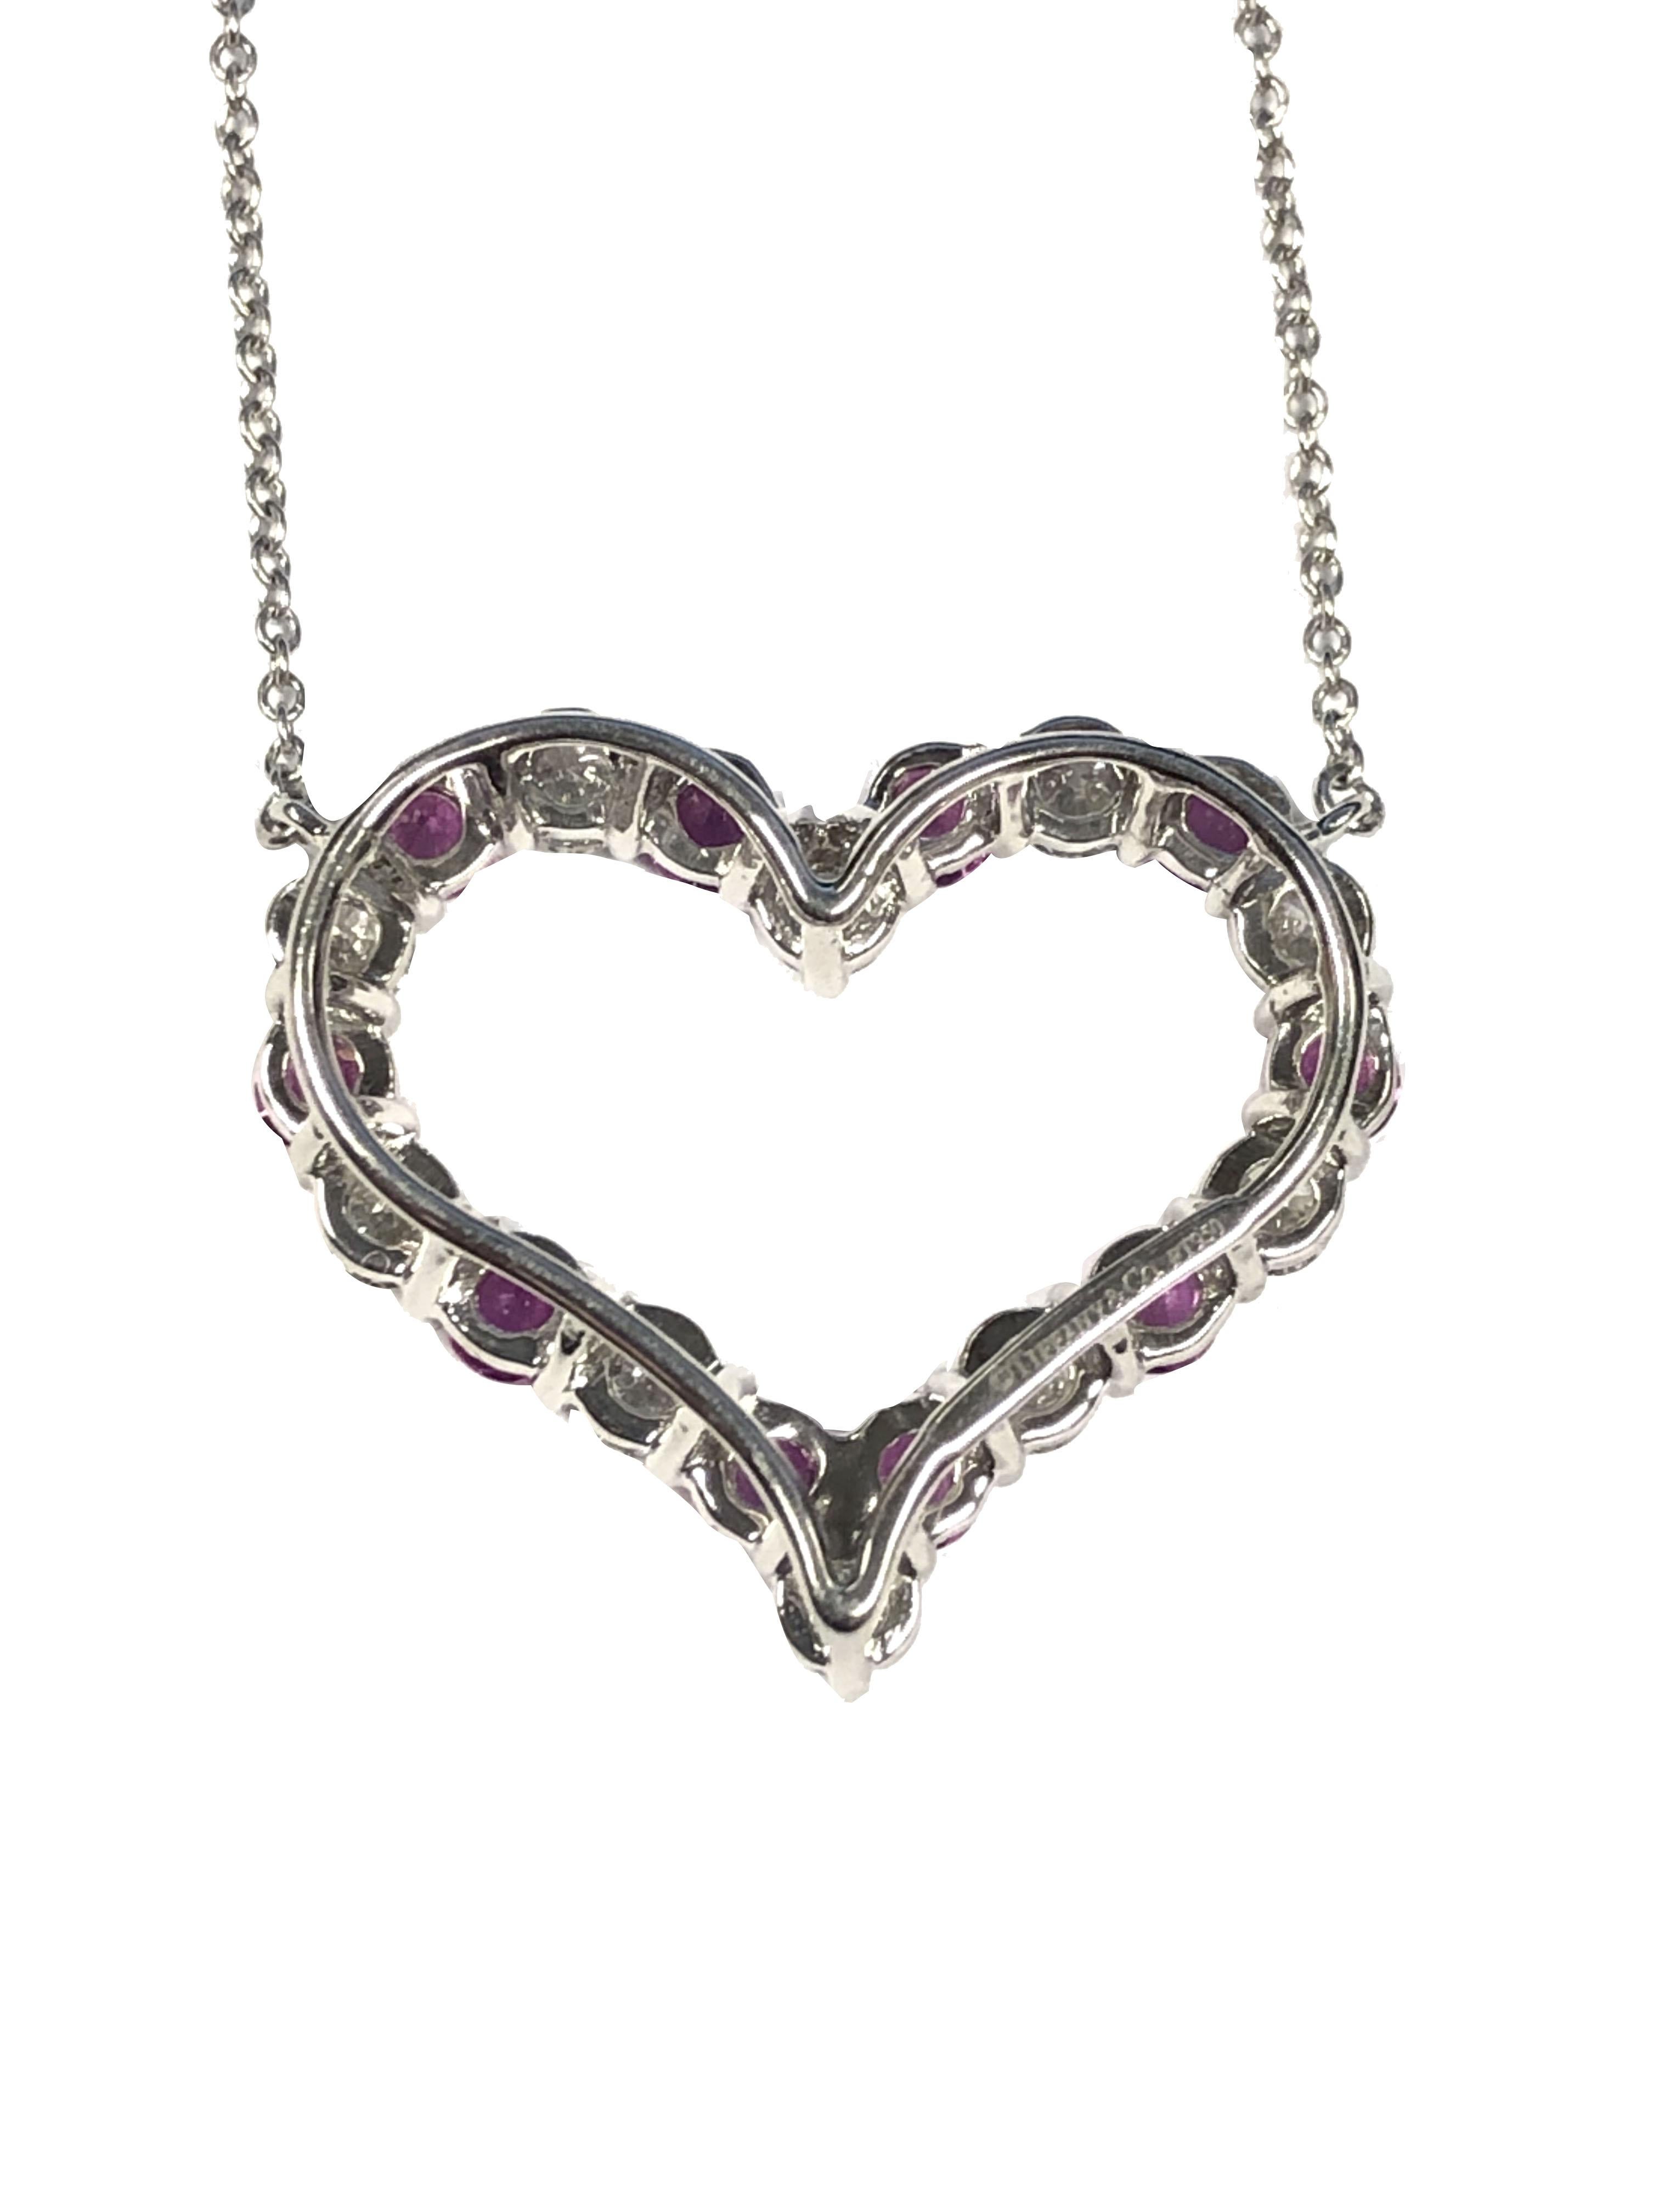 Circa: 2018 Tiffany & Company Platinum Open Heart Pendant Necklace, the Heart measures 1 X 7/8 inch and is set with Round Brilliant cut Diamonds totaling 1 Carat and grading as G in color and VS clarity, further set with Round Pink Sapphires of very